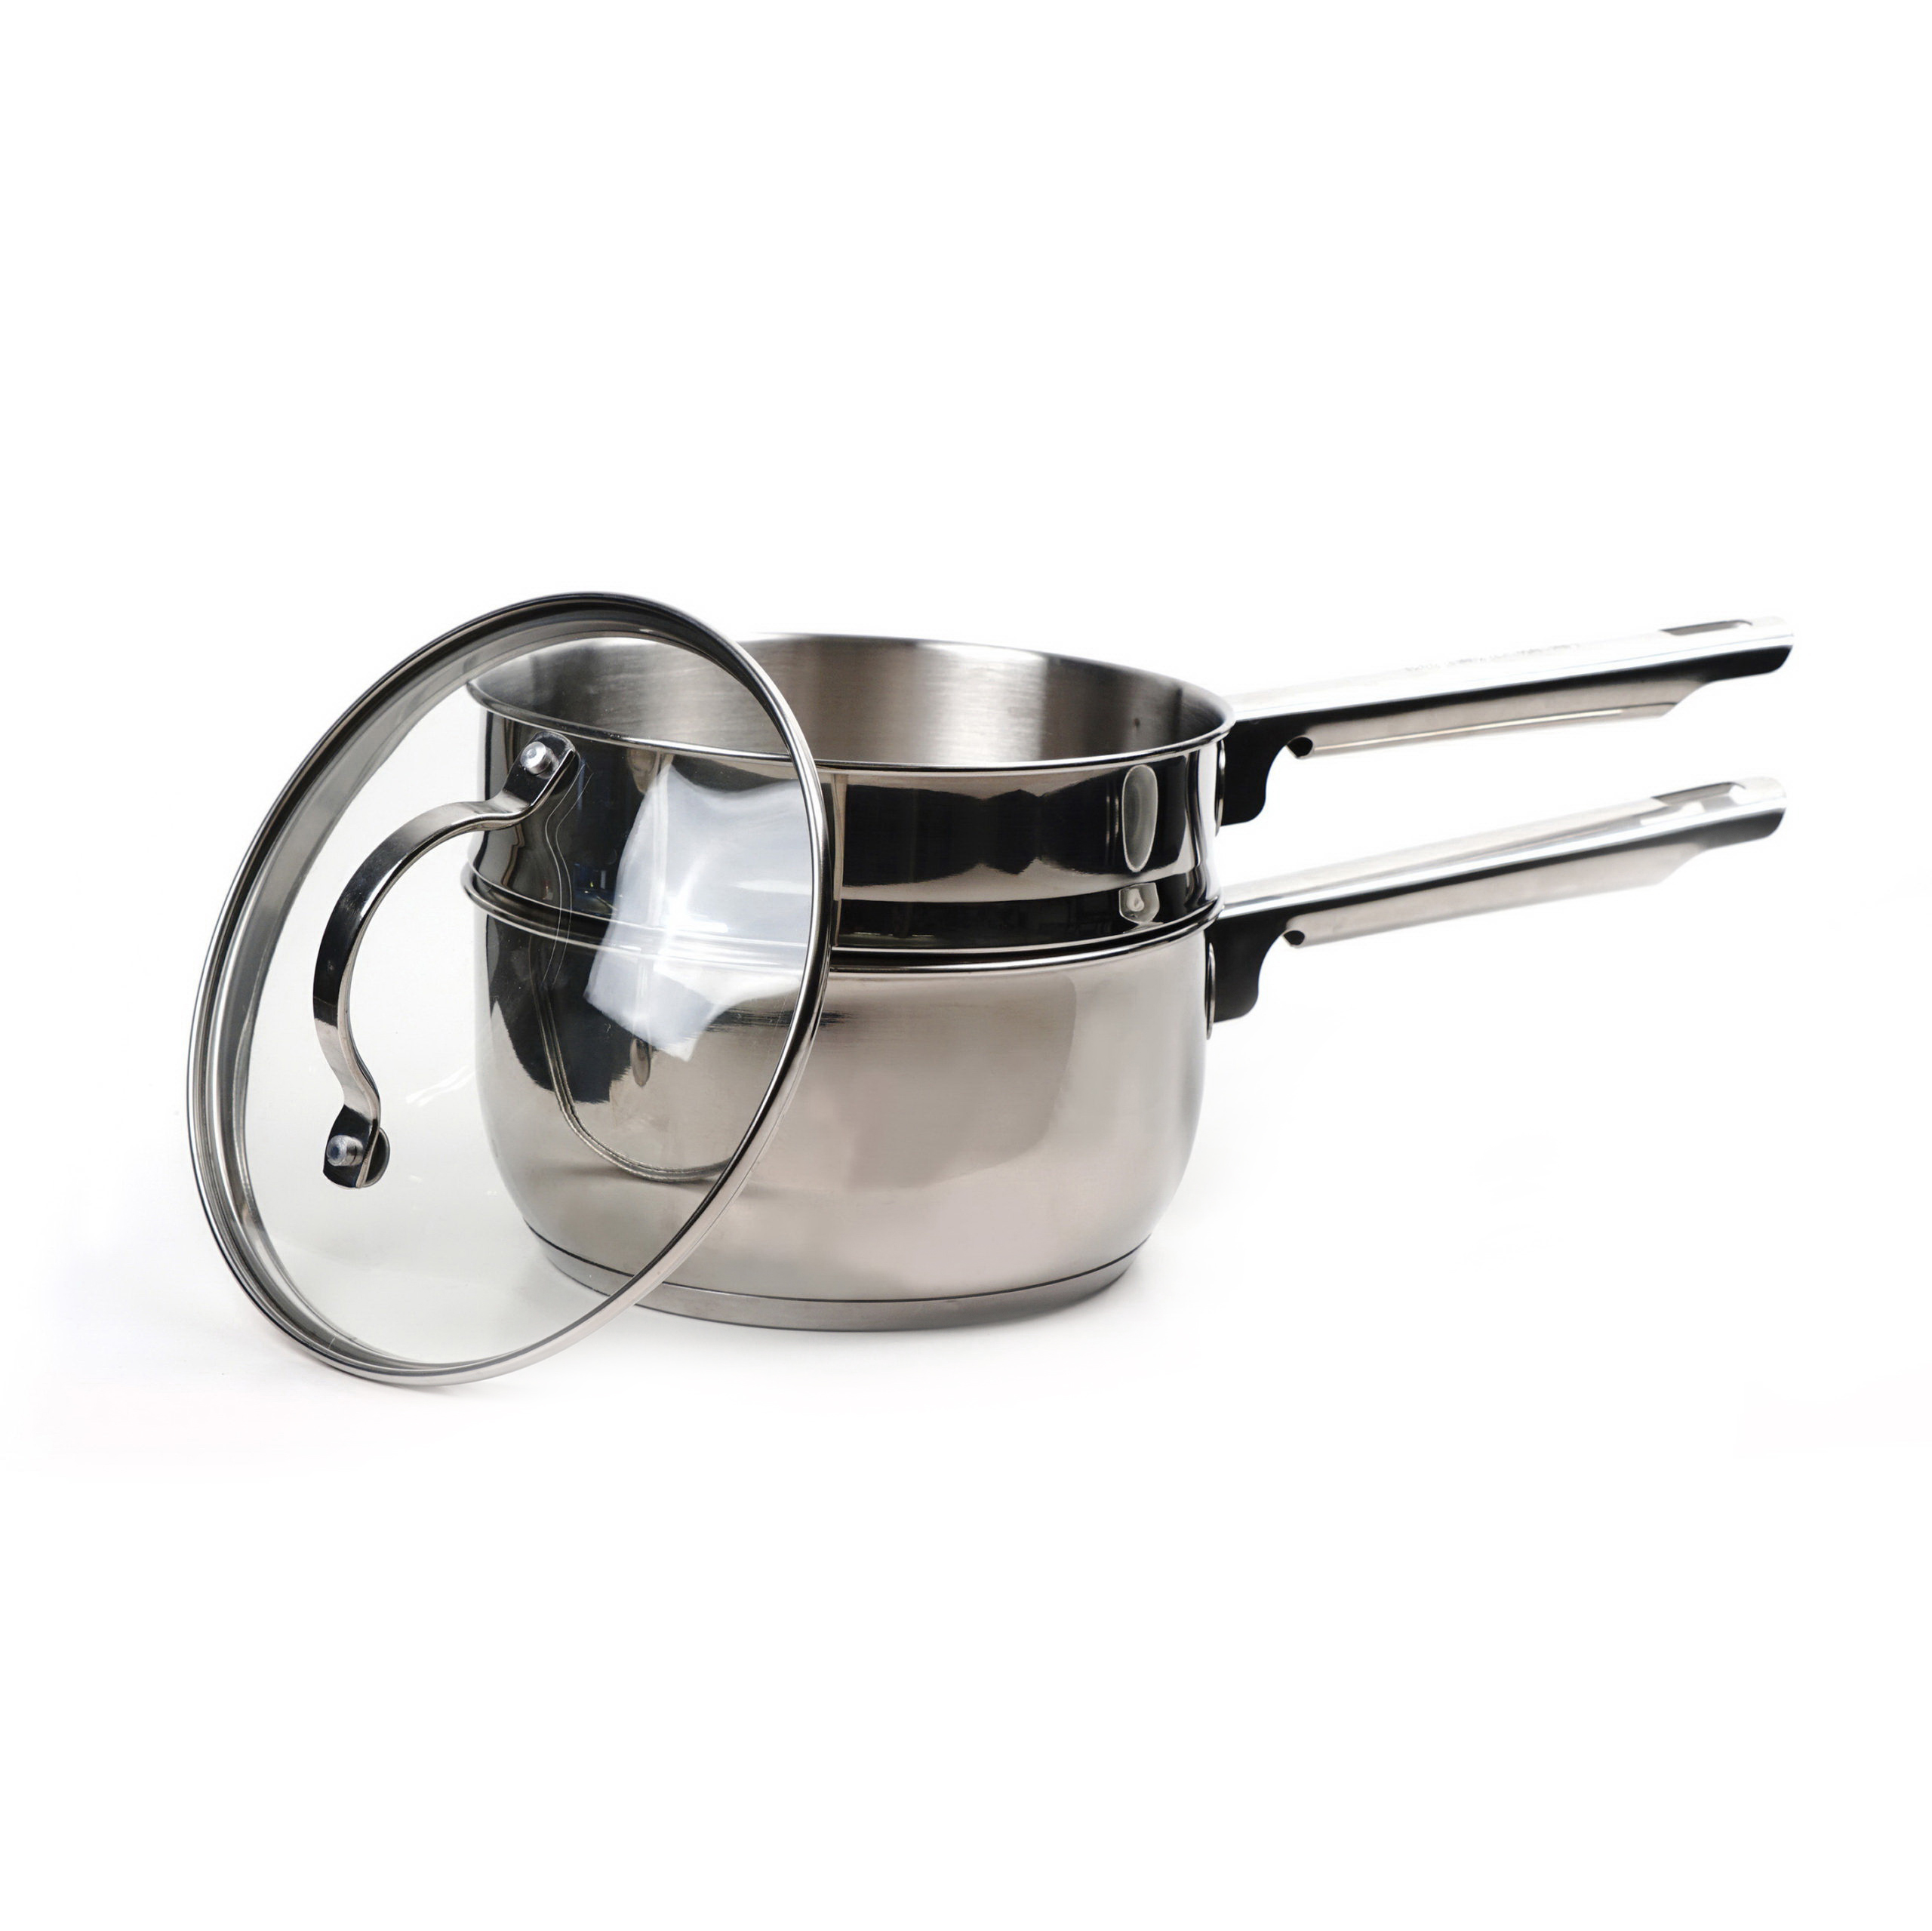 Endurance TDB-2 Induction Double Boiler, 2 qt, 6 in H Boiler, Stainless Steel - 1